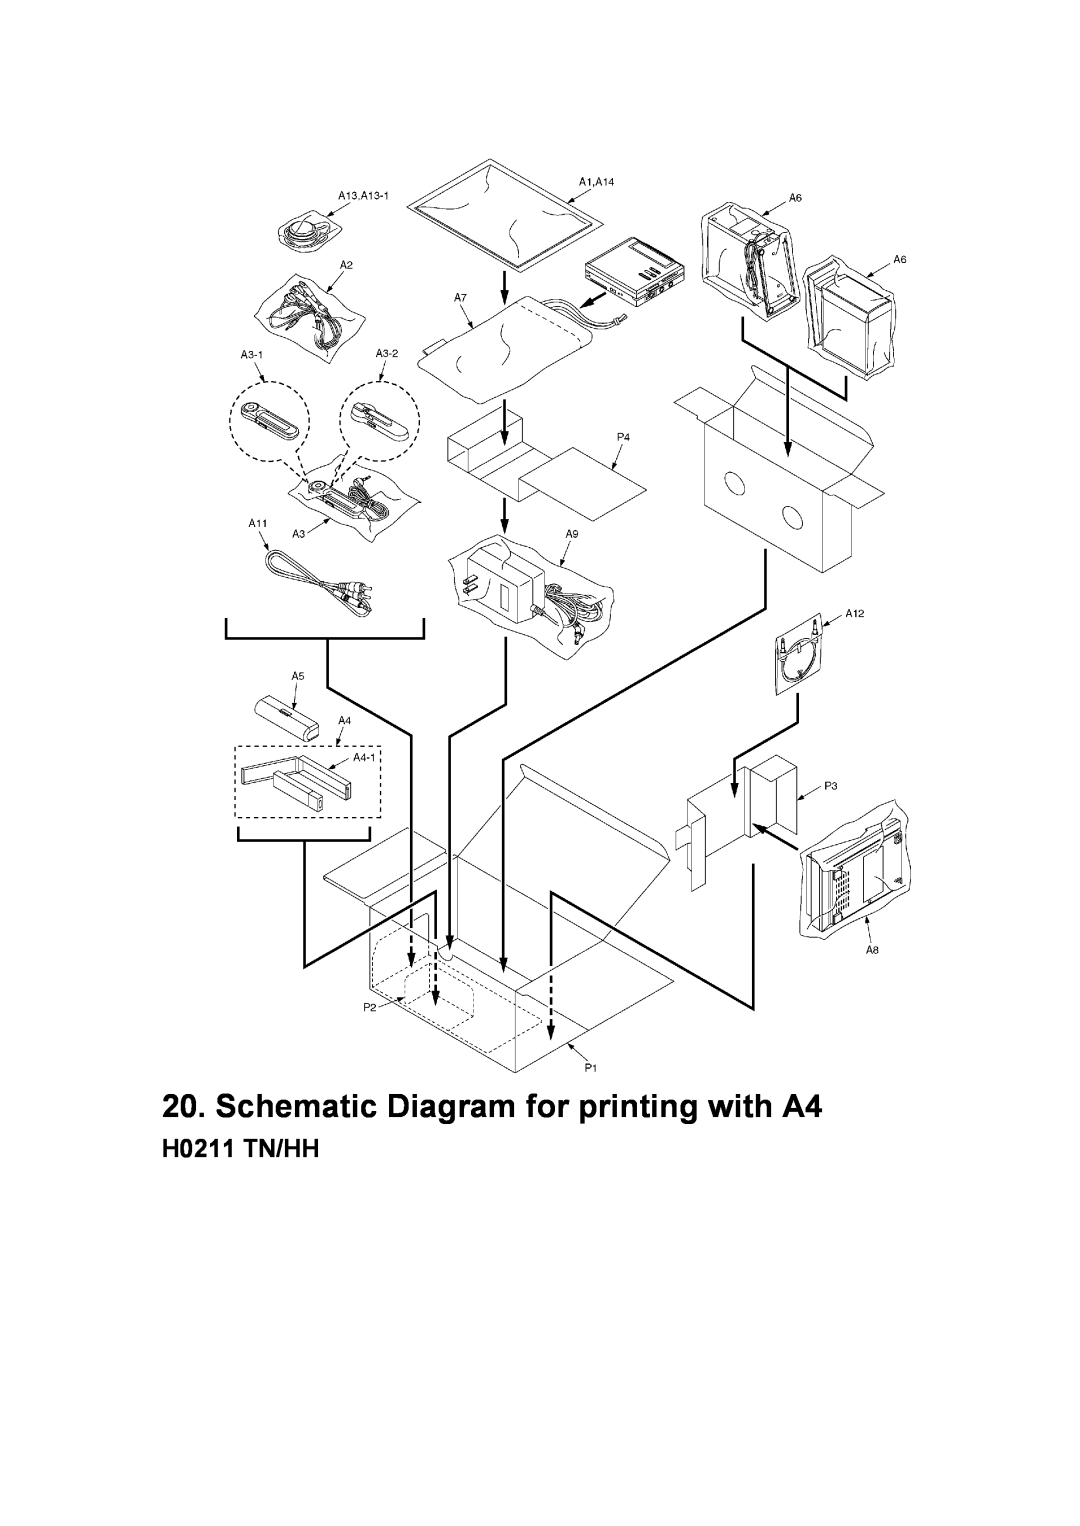 Panasonic SJ-MR230DGK specifications Schematic Diagram for printing with A4, H0211 TN/HH 